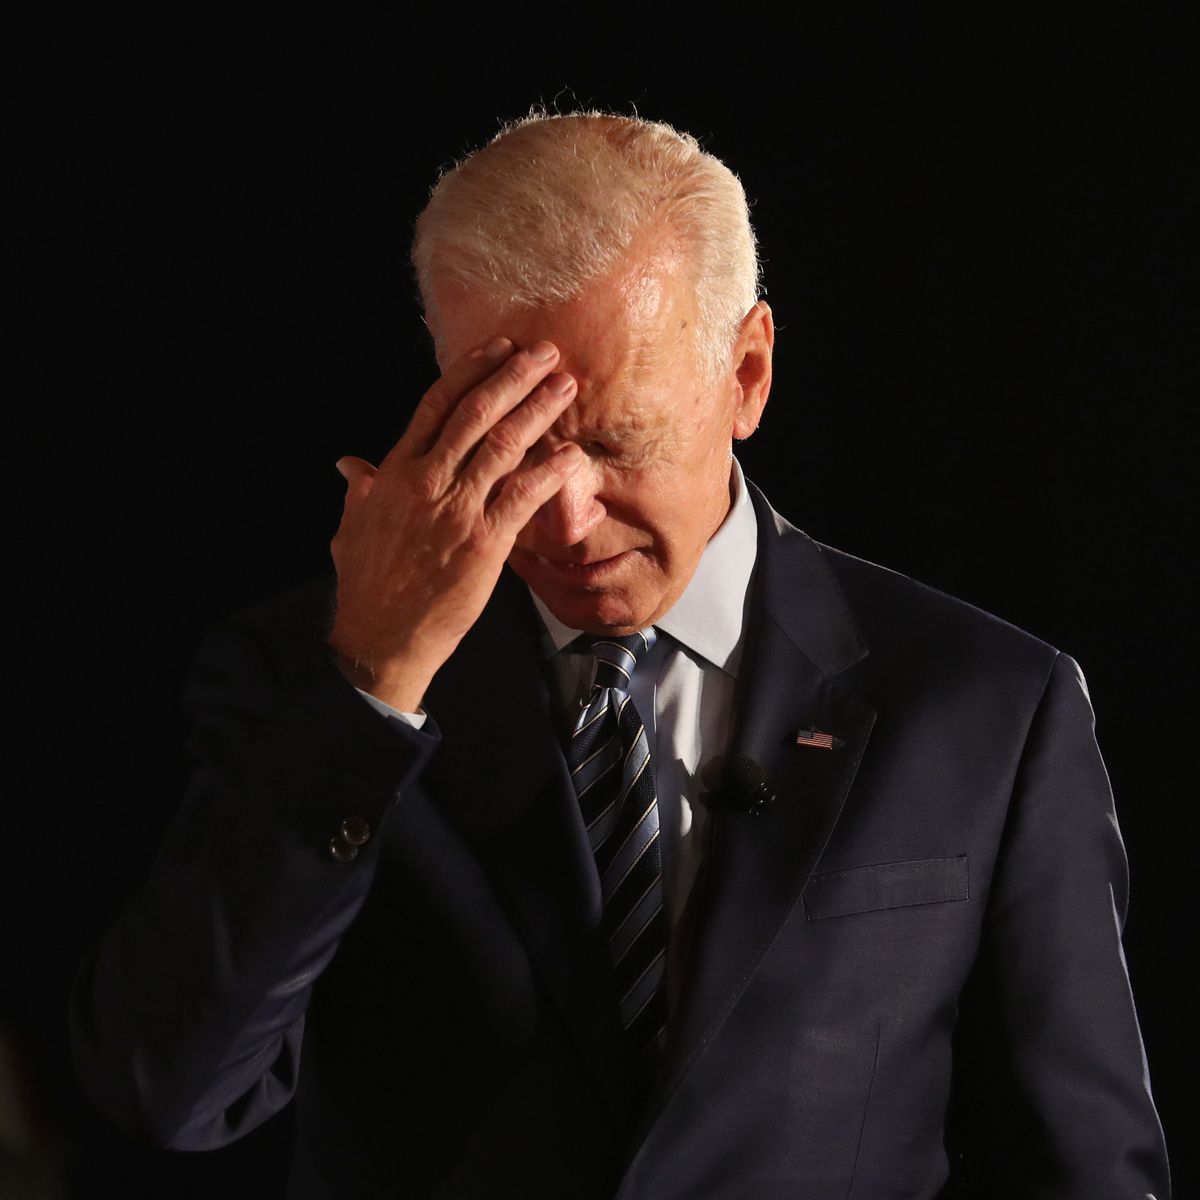 why joe biden will be the 2016 nominee - Biden|President|Joe|Years|Trump|Delaware|Vice|Time|Obama|Senate|States|Law|Age|Campaign|Election|Administration|Family|House|Senator|Office|School|Wife|People|Hunter|University|Act|State|Year|Life|Party|Committee|Children|Beau|Daughter|War|Jill|Day|Facts|Americans|Presidency|Joe Biden|United States|Vice President|White House|Law School|President Trump|Foreign Relations Committee|Donald Trump|President Biden|Presidential Campaign|Presidential Election|Democratic Party|Syracuse University|United Nations|Net Worth|Barack Obama|Judiciary Committee|Neilia Hunter|U.S. Senate|Hillary Clinton|New York Times|Obama Administration|Empty Store Shelves|Systemic Racism|Castle County Council|Archmere Academy|U.S. Senator|Vice Presidency|Second Term|Biden Administration